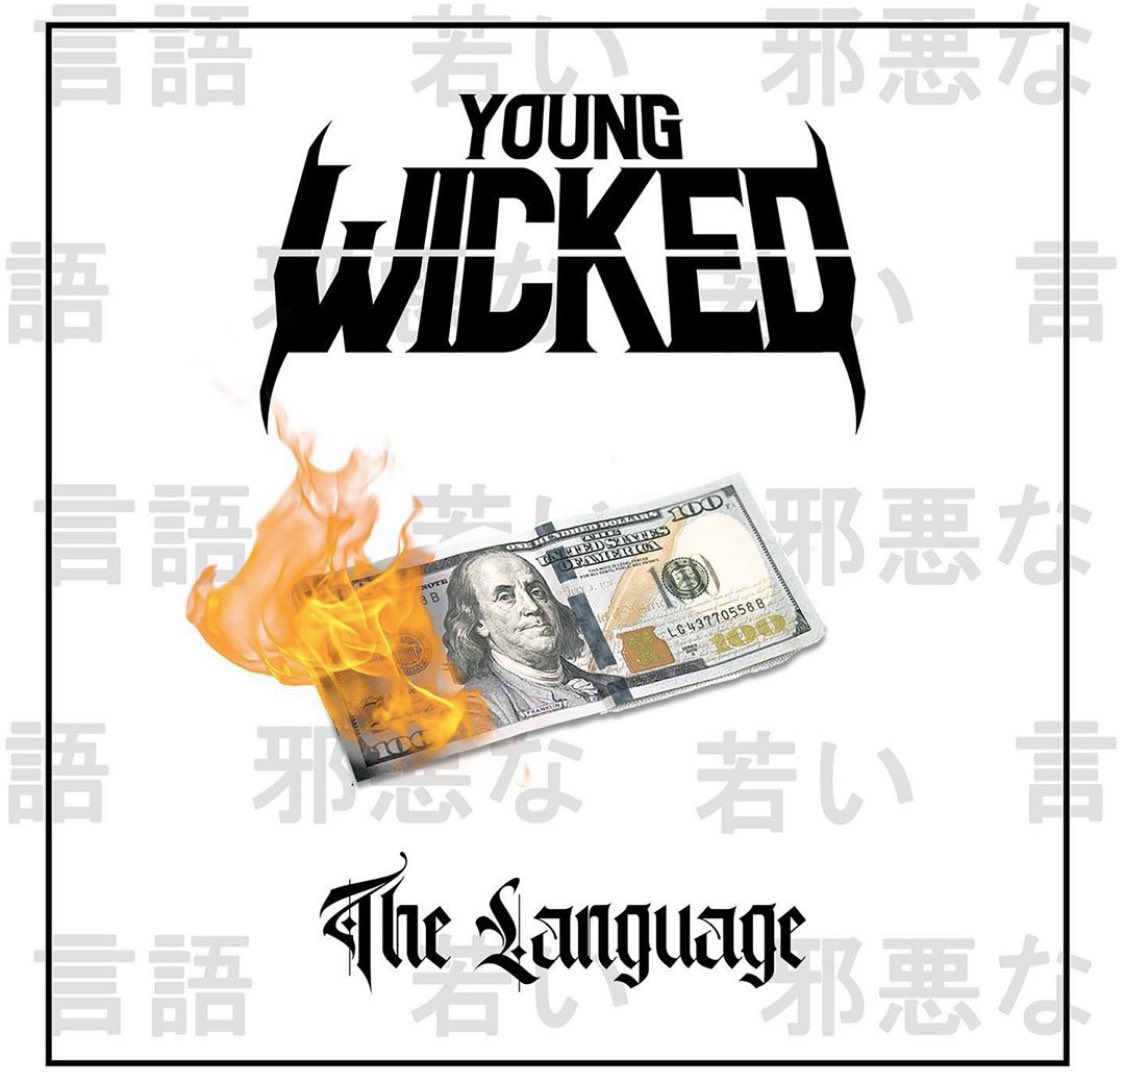 We are days away from @youngwicked303 ‘s brand new track #TheLanguage - it drops January 31st!!! Look 👀 for it on all #digitaloutlets!!! #majikninjaentertainment #youngwicked #rap #underground #mne2020 #newmusic